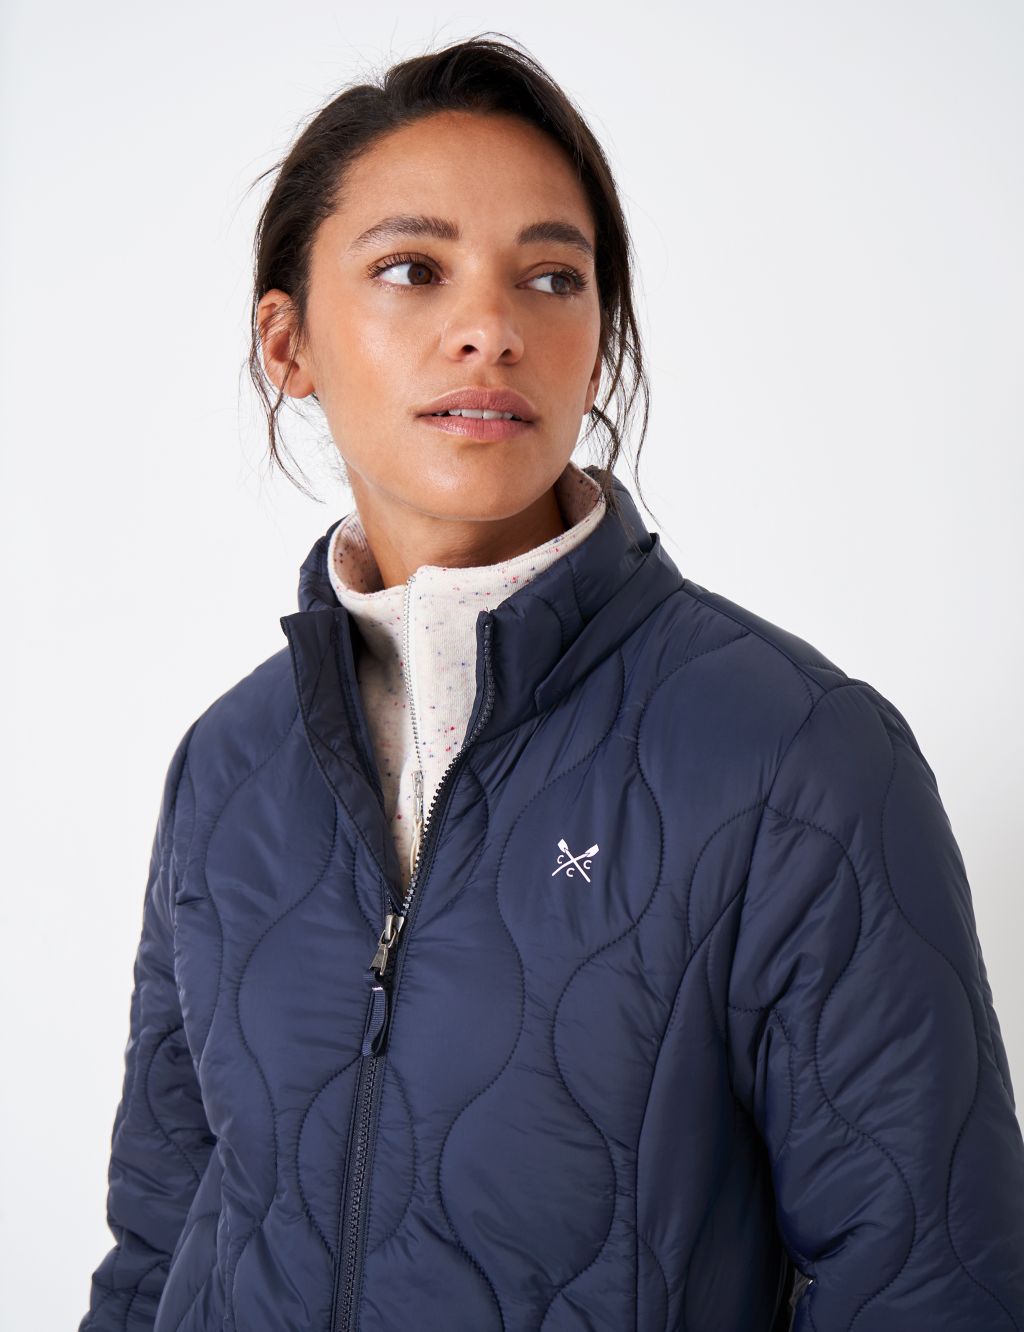 Quilted Lightweight Hooded Longline Coat | Crew Clothing | M&S